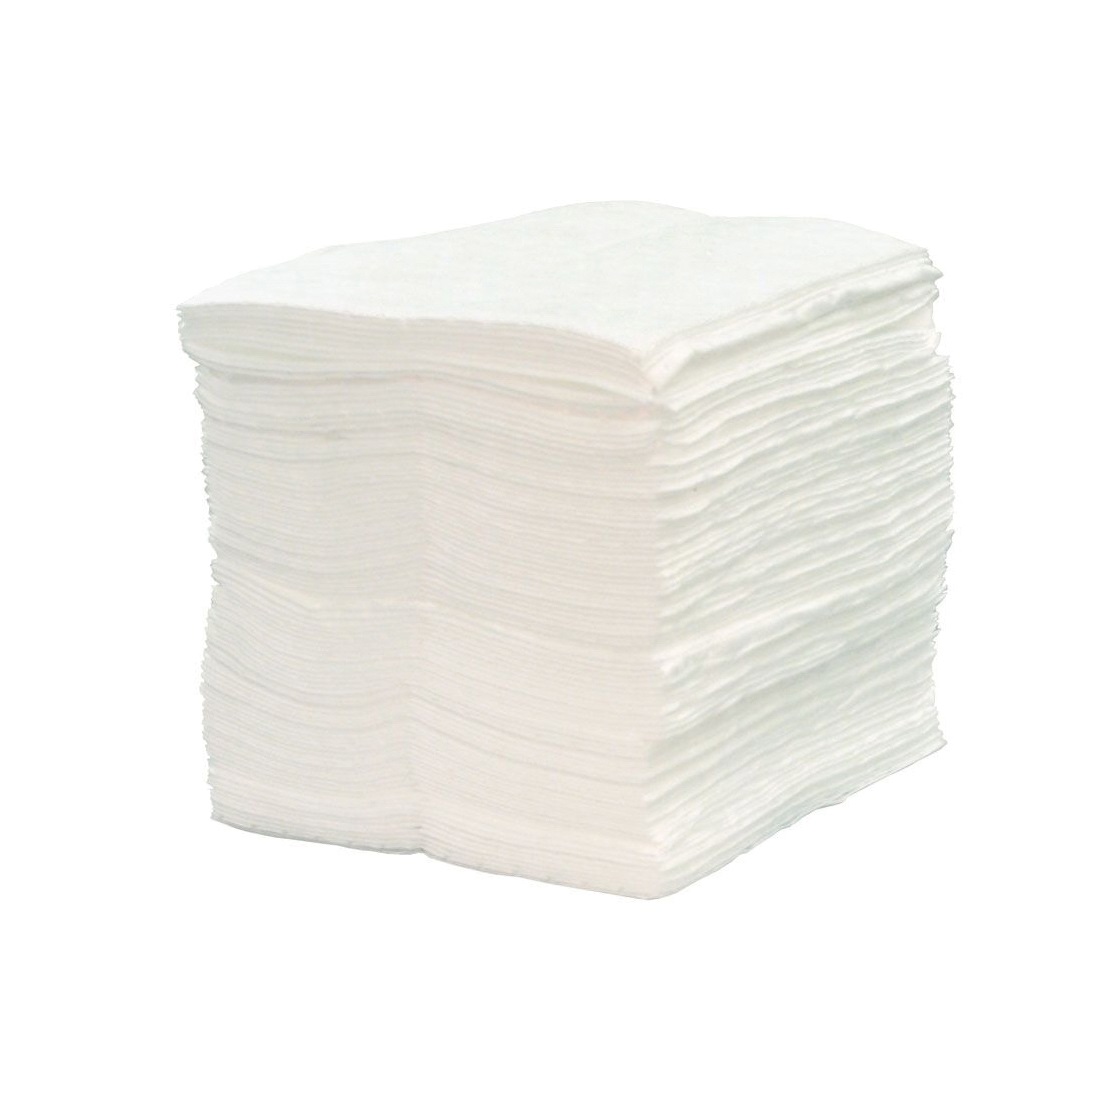 Chemtex PWB100HL Meltblown Pad, 15 in W, 18 in L, 7-1/2 in, 19 in Perforated, Polypropylene, White